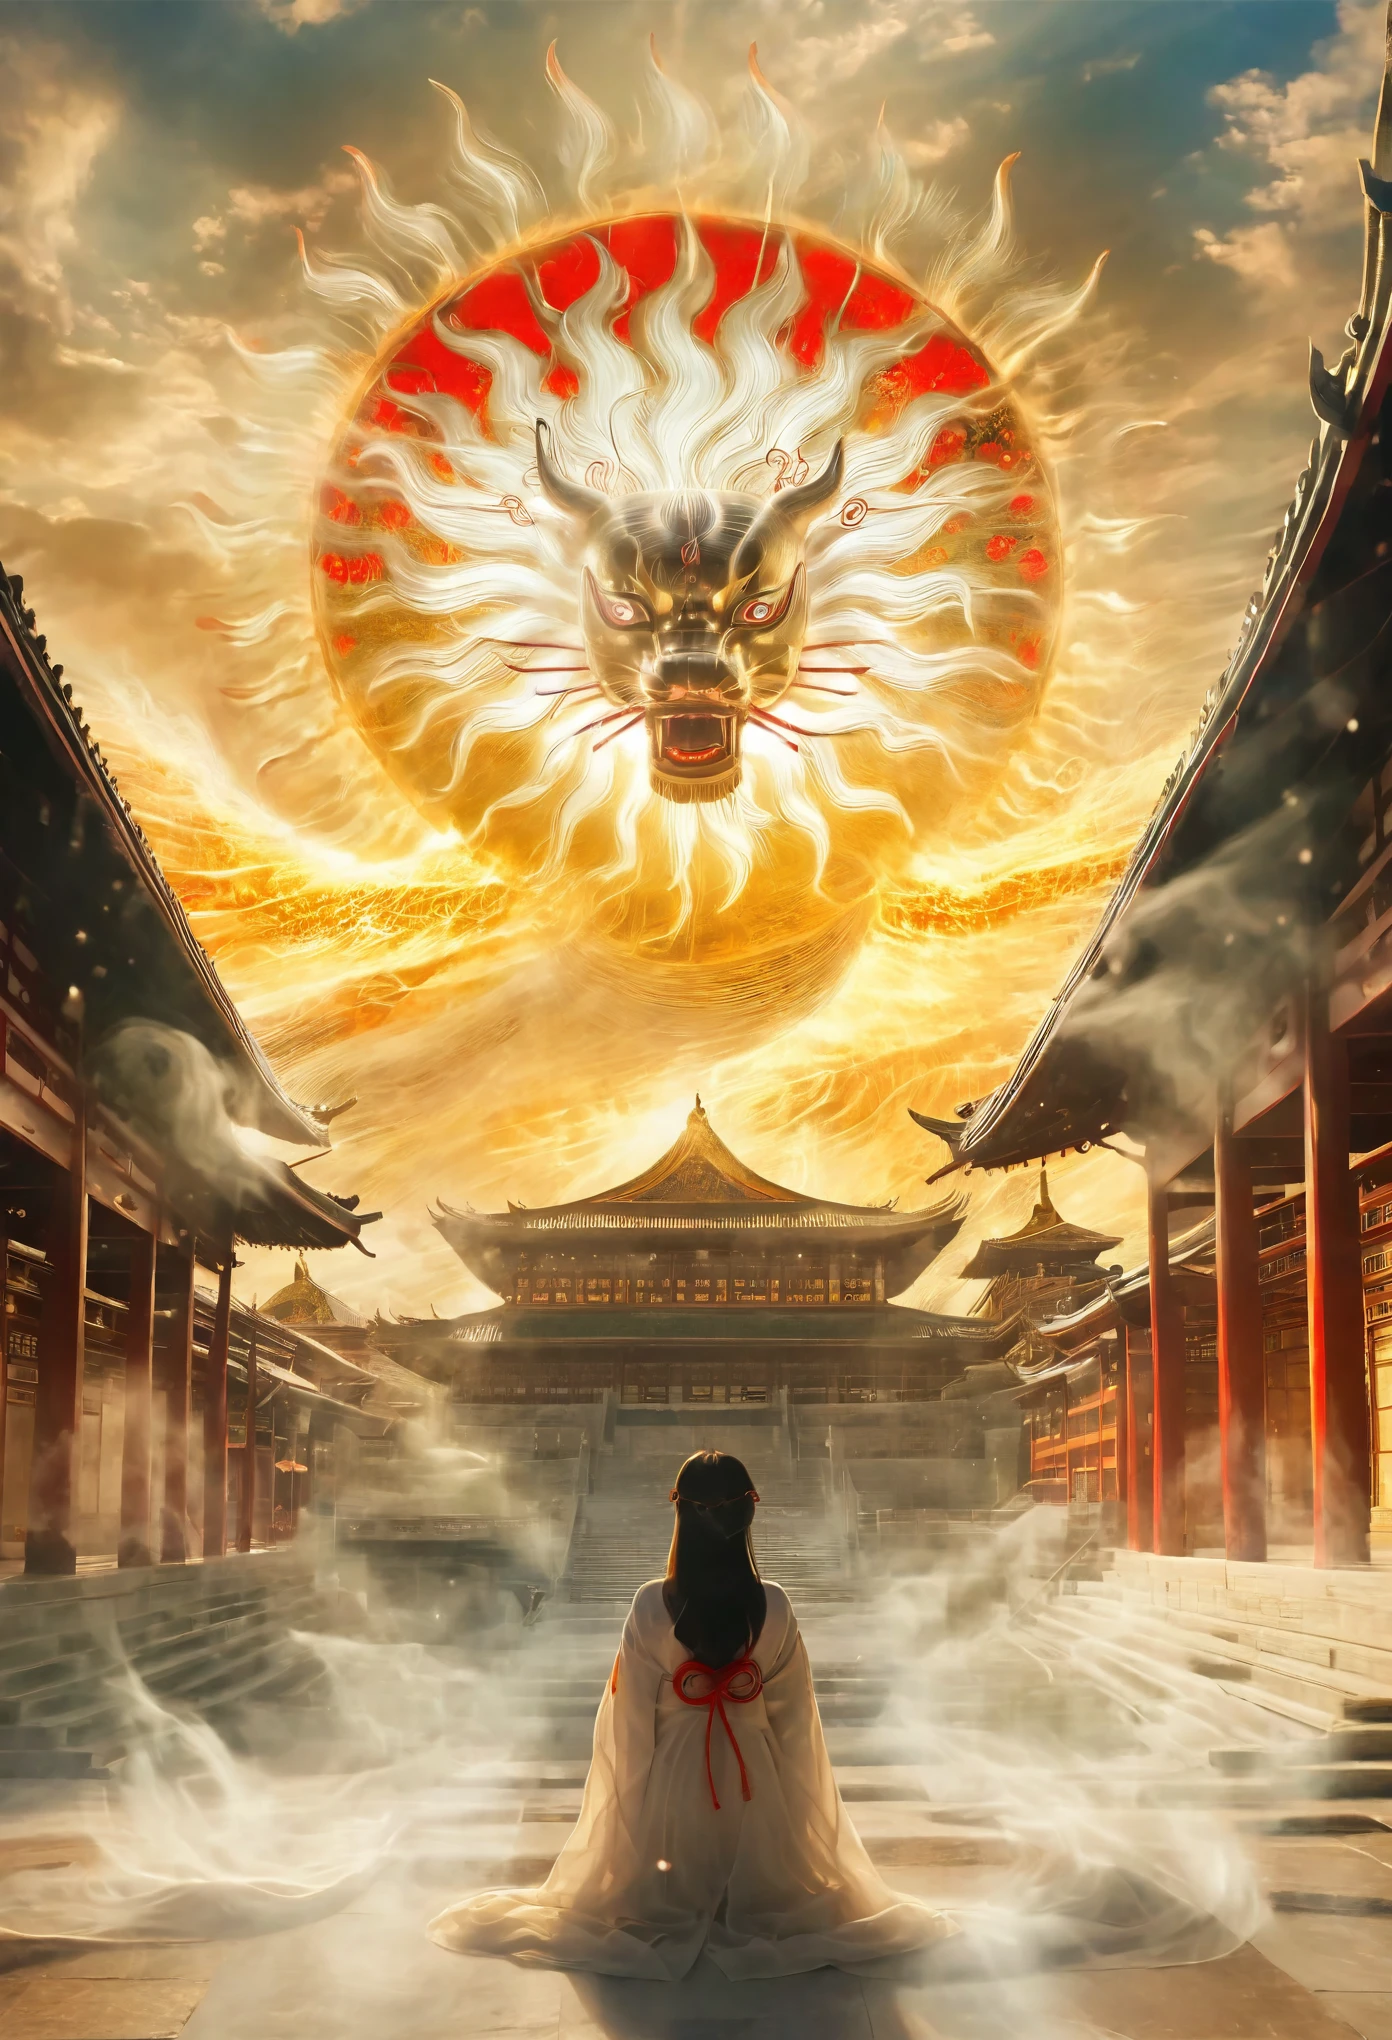  Photography of Amaterasu set against a grand palace backdrop, enveloped in a fantastical and dreamlike ambiance that merges Japanese myth with surreal and ethereal elements. The high-resolution photo captures the divine beauty of Amaterasu, the sun goddess, radiating a celestial glow against the backdrop of the mystical palace. The scene exudes a sense of magic and wonder, transporting viewers into a realm where mythology and imagination intertwine seamlessly, creating a visually captivating fusion of reality and the supernatural,xianxia